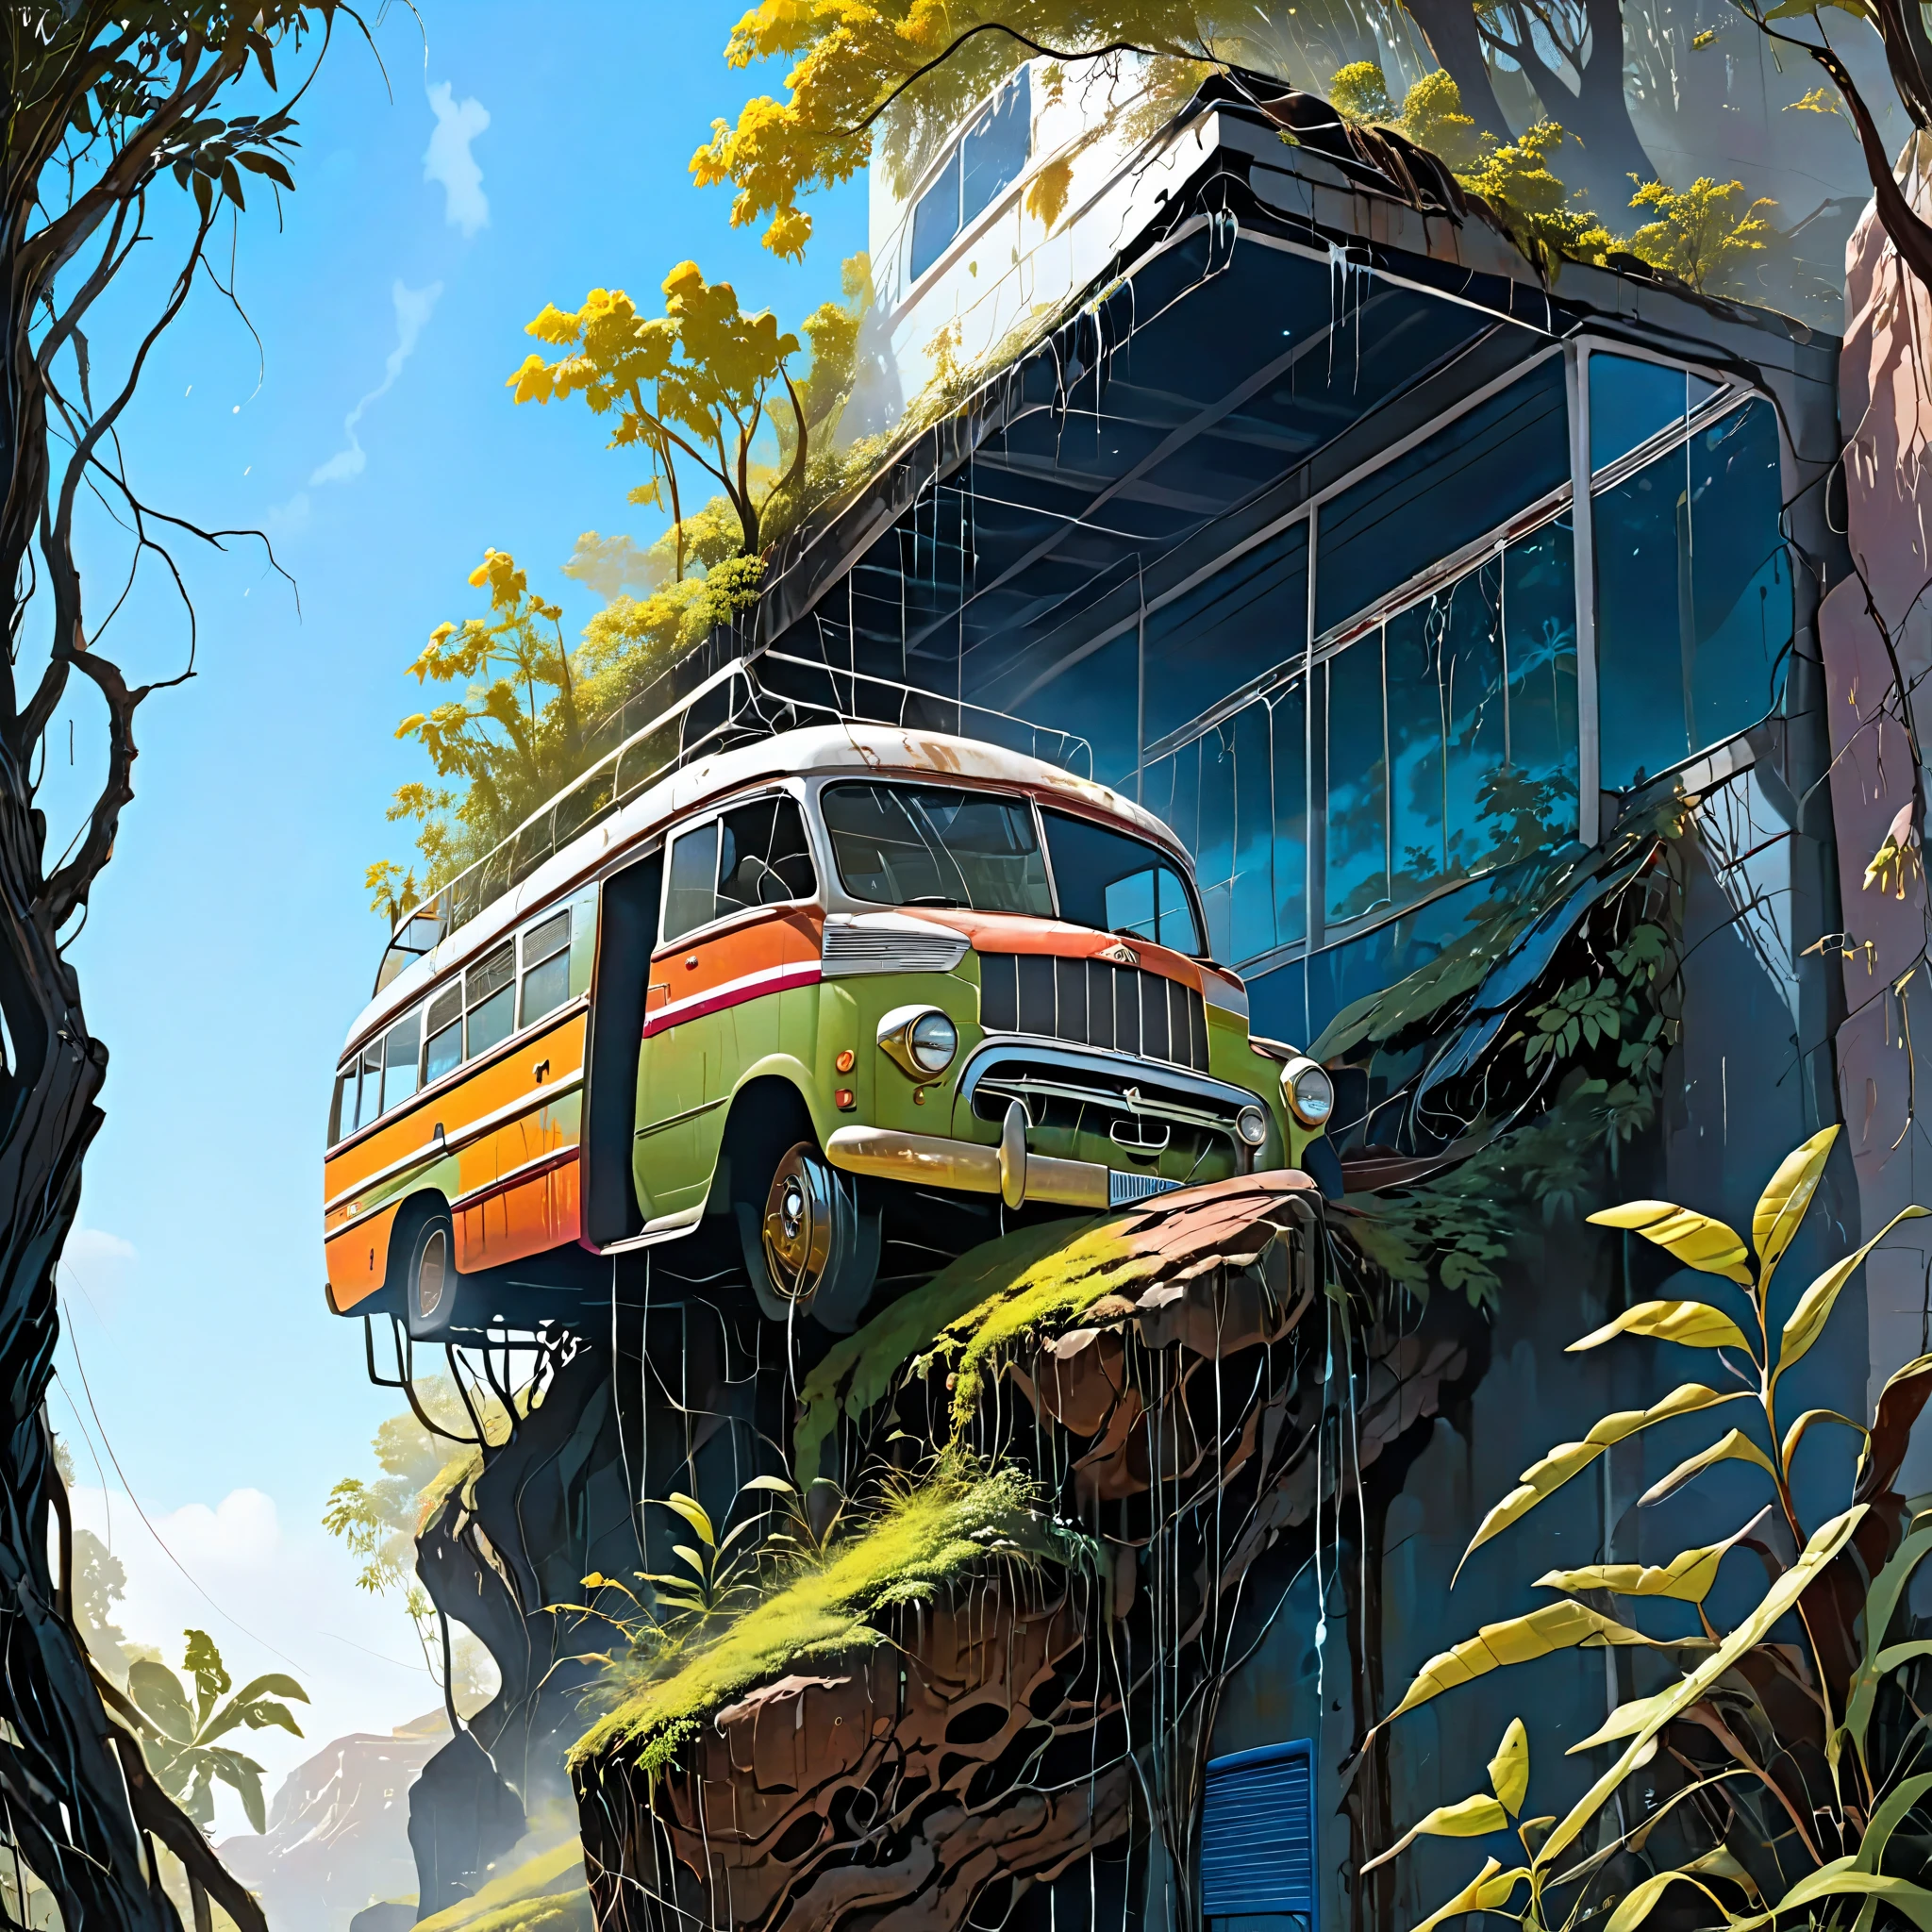 A REALISTIC PHOTOGRAPH OF AN OLD AND RUSTY BUS USED AS A BRIDGE ON THE TOP OF A MOUNTAIN, THE BUS IS DIRTY AND WITH PEELING PAINT, WEEDS AND TREES GROW IN AND AROUND IT, RAINY AND MISTRY WEATHER